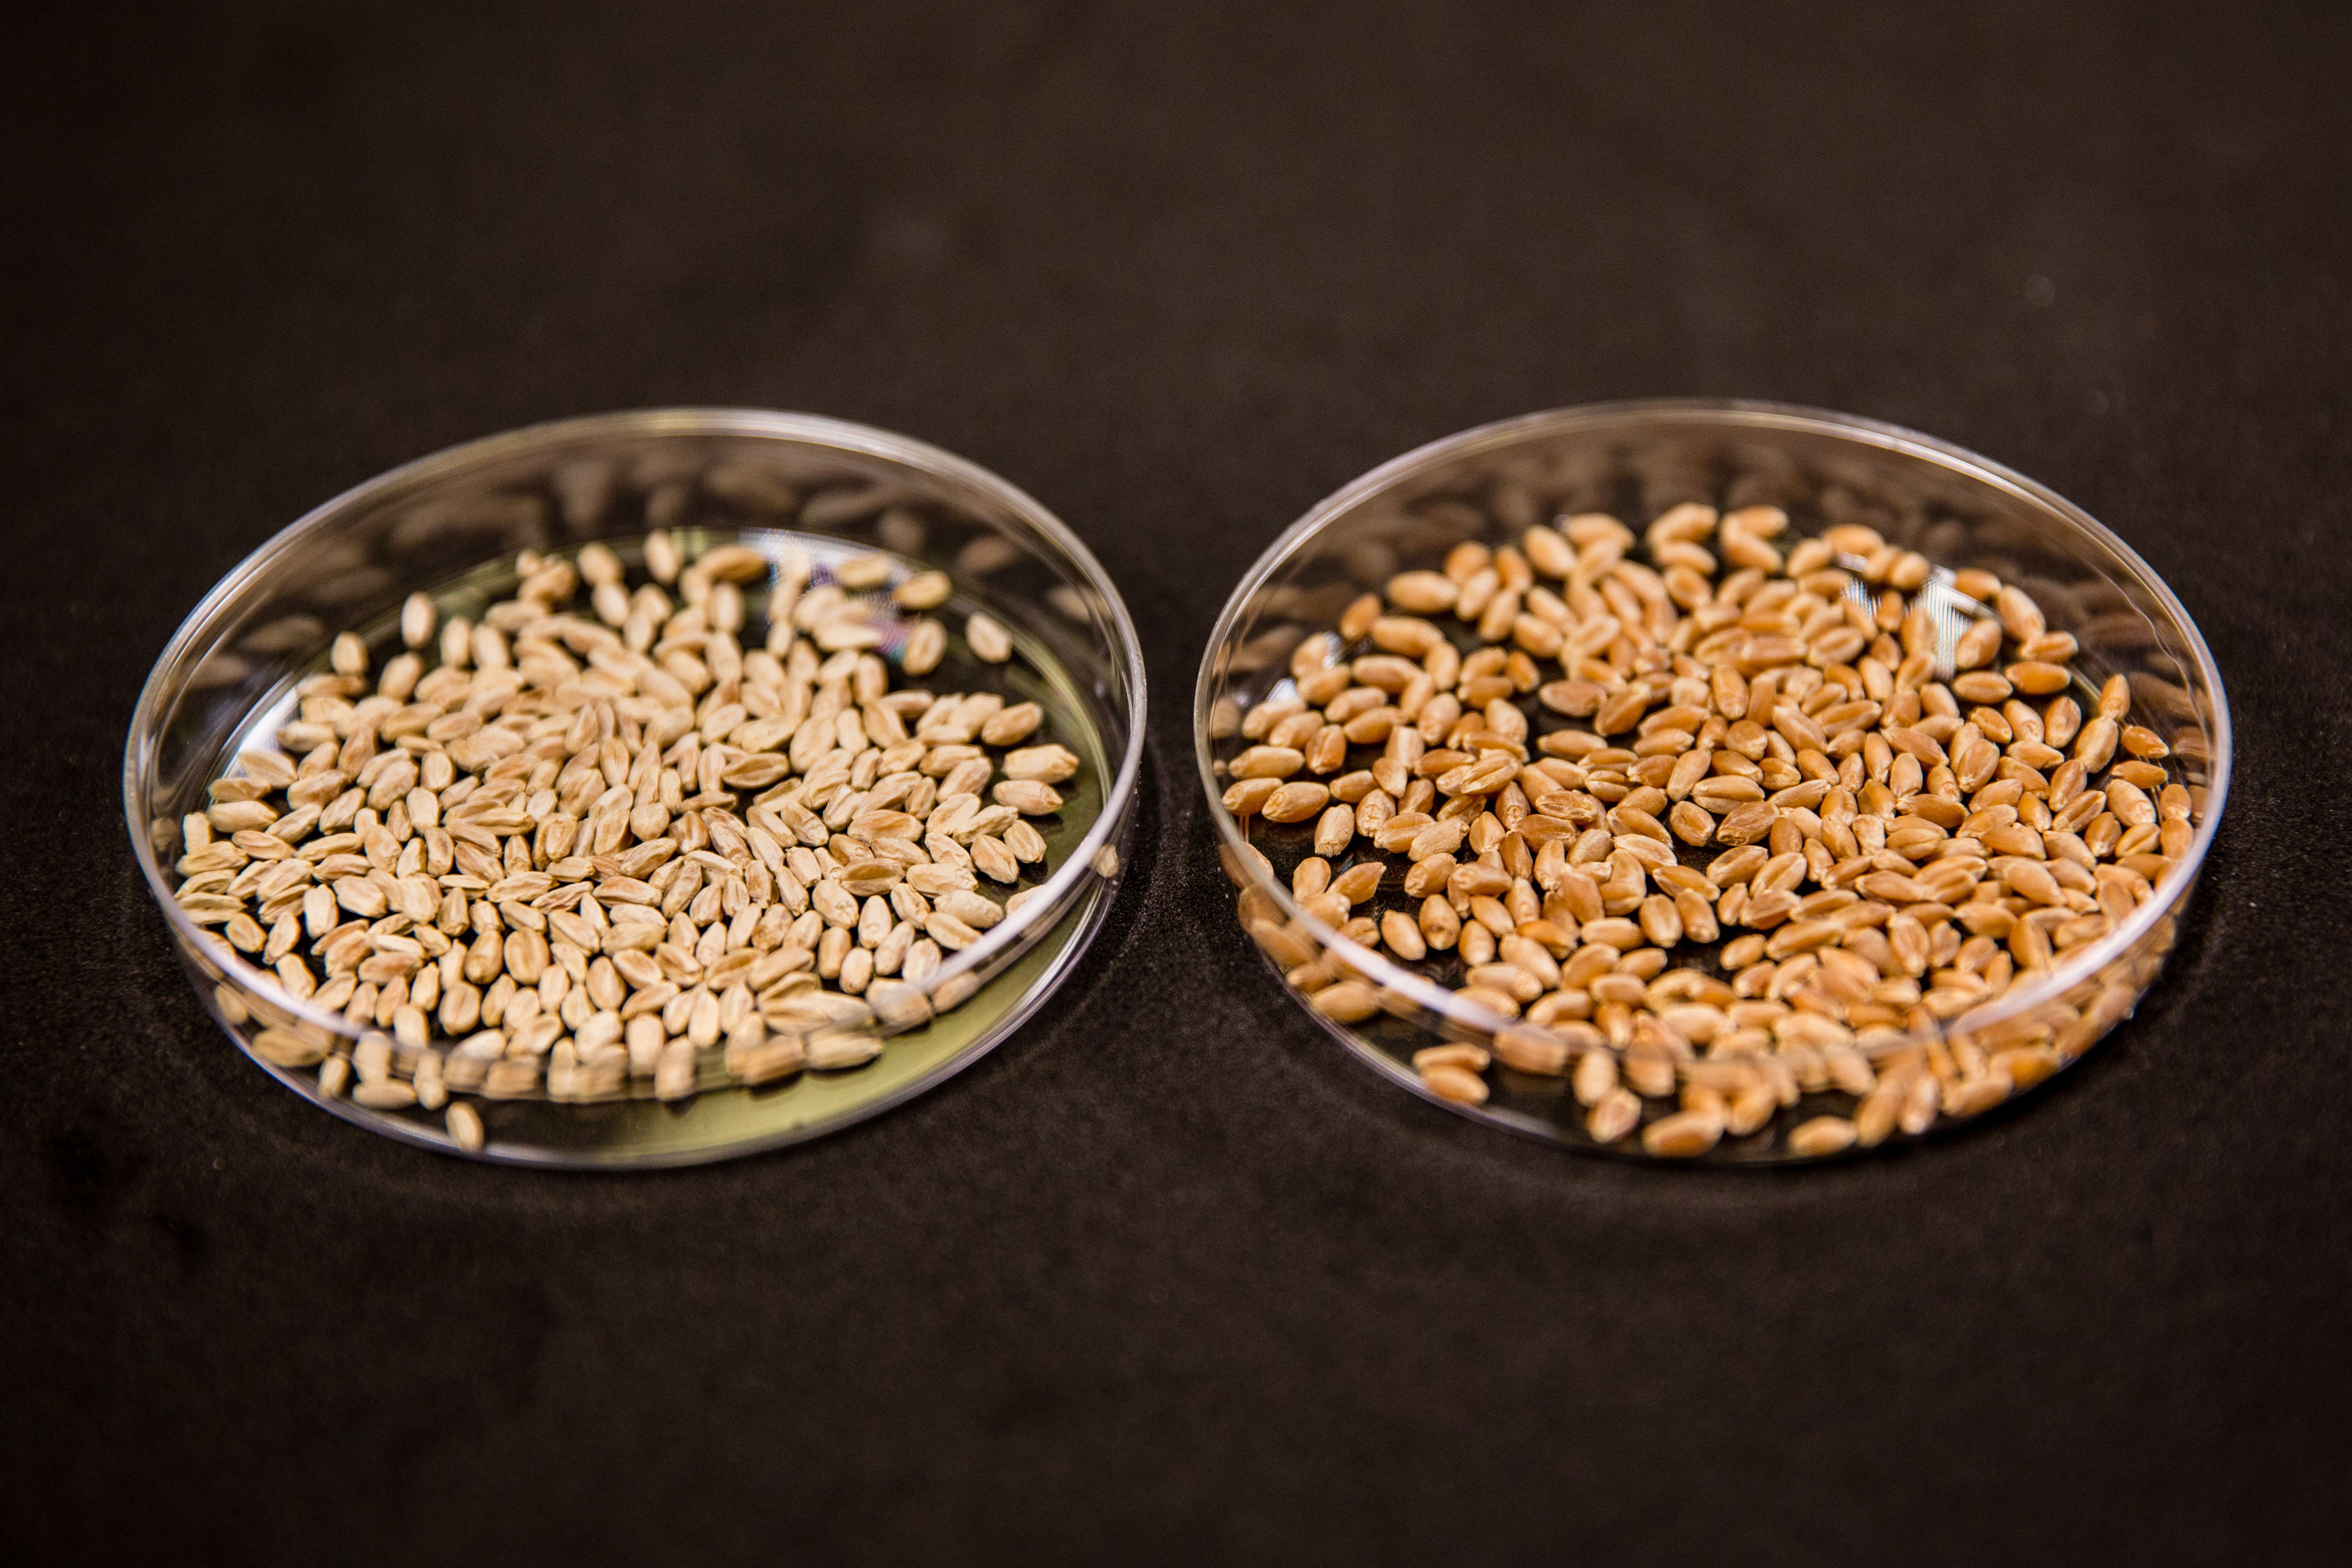 infected vs healthy wheat grains